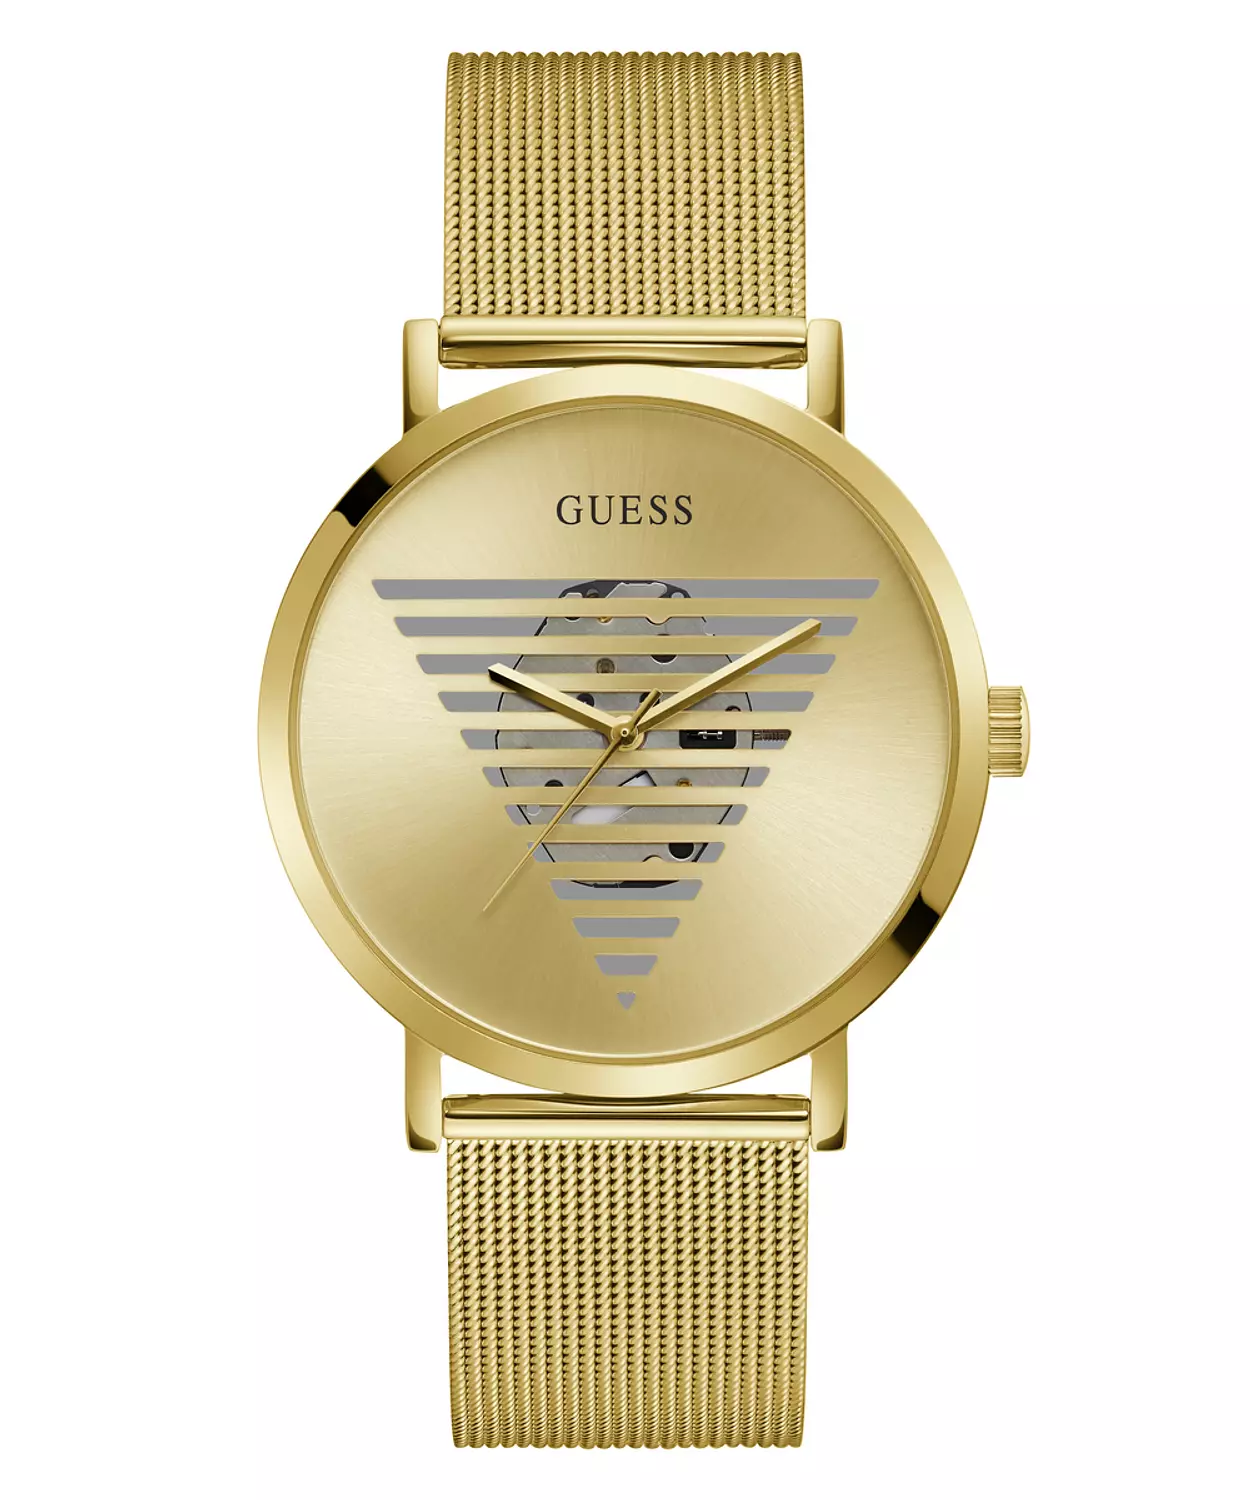 GUESS GW0502G1 ANALOG WATCH For Men Round Shape Gold Stainless Steel/Mesh Polished Bracelet 0